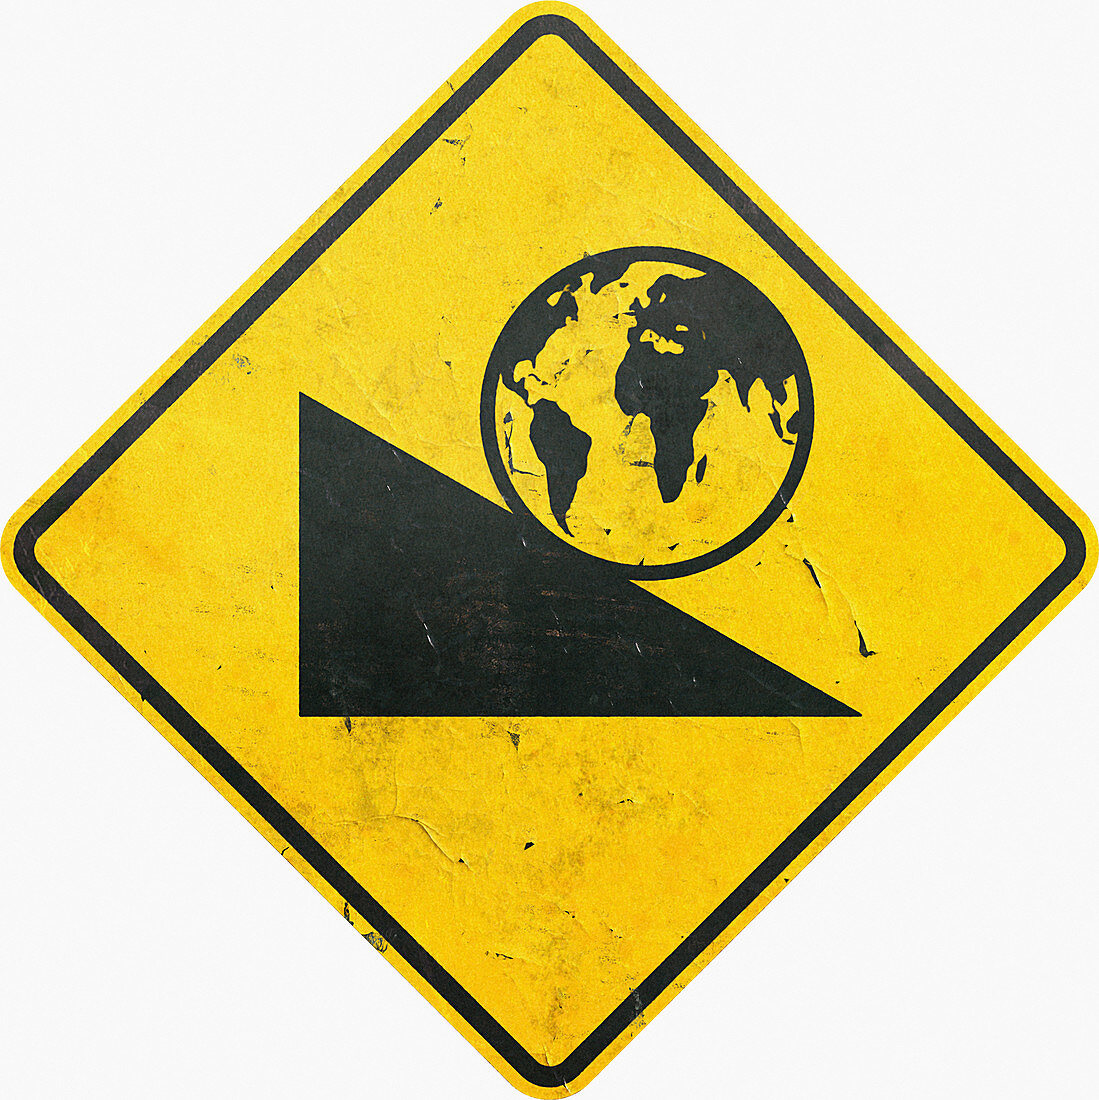 Yellow caution sign with globe rolling, illustration